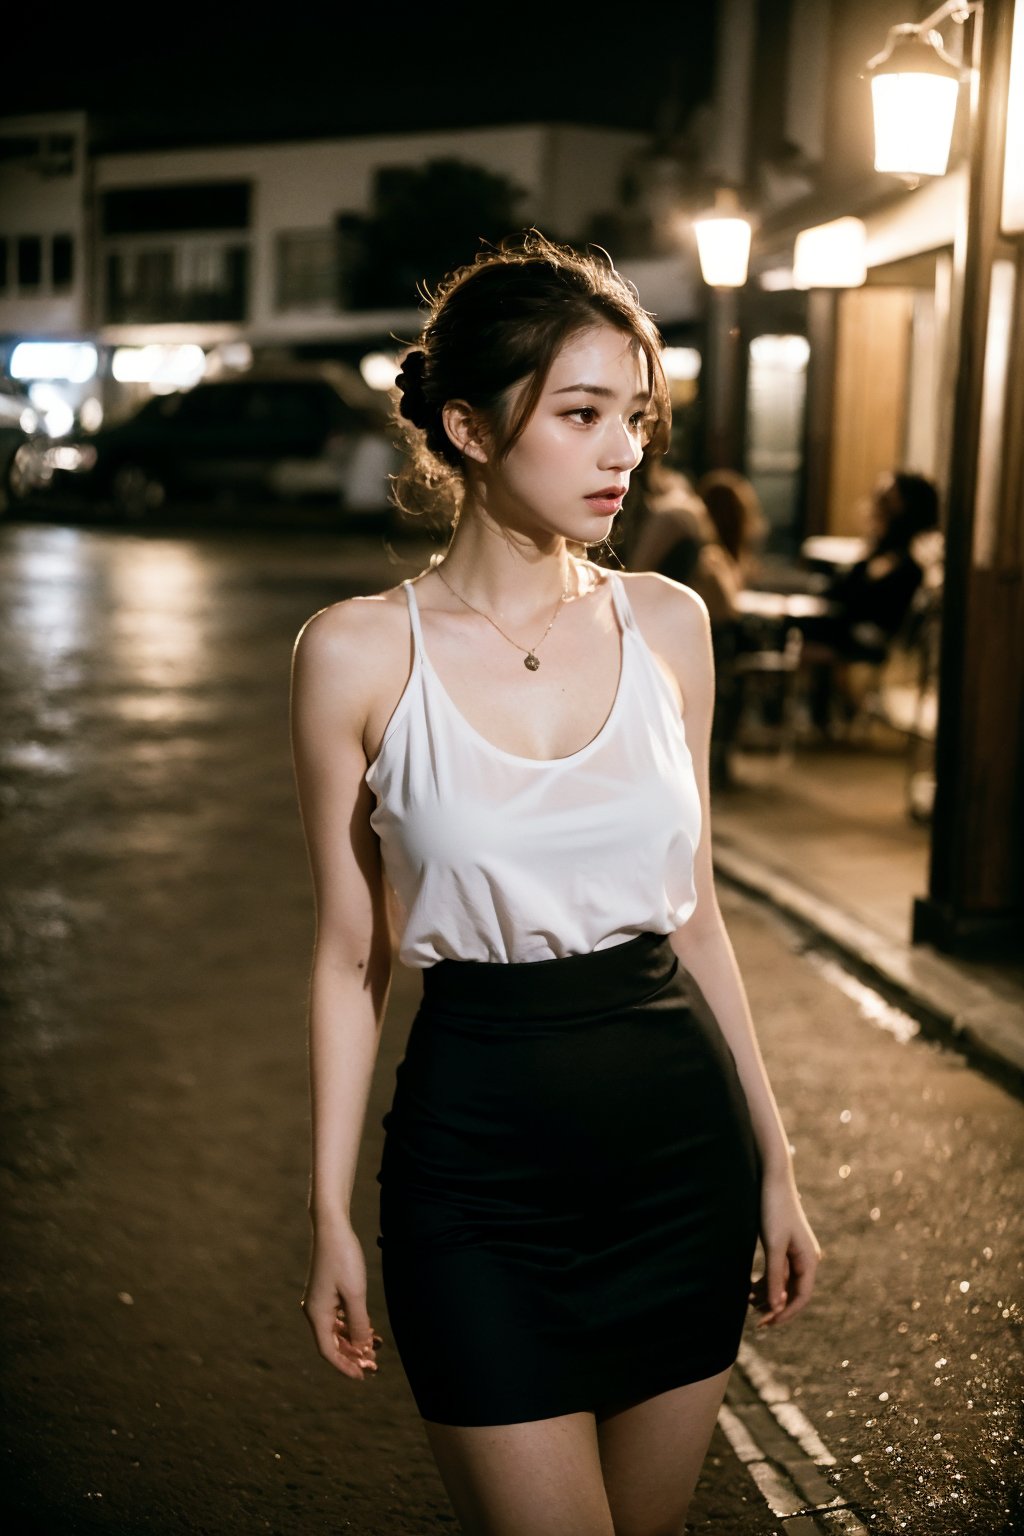 (Best quality, 8k, 32k, Masterpiece, Photoreal, UHD:1.2),Photo of Pretty Japanese woman, 1girl, 22yo, (shoulder-length dark brown updo hair), double eyelids, highly detailed clear and symmetrical glossy eyes, glossy lips, natural round large breasts, wide hips, slender legs, soft curves, (pale skin:1.2), clean skin, detailed skin texture, necklace, blouse, loose long skirt, pumps heels, (midnight, night:1.3), (contrast:1.4), dating at seaside, sharp focus, sexy face, (looking away:1.3), legs focus, highly details, soft and bouncy body, beautiful tits, beautiful legs, detailed eyes, detailed facial, detailed hair, detailed fabric rendering,epiC35mm,